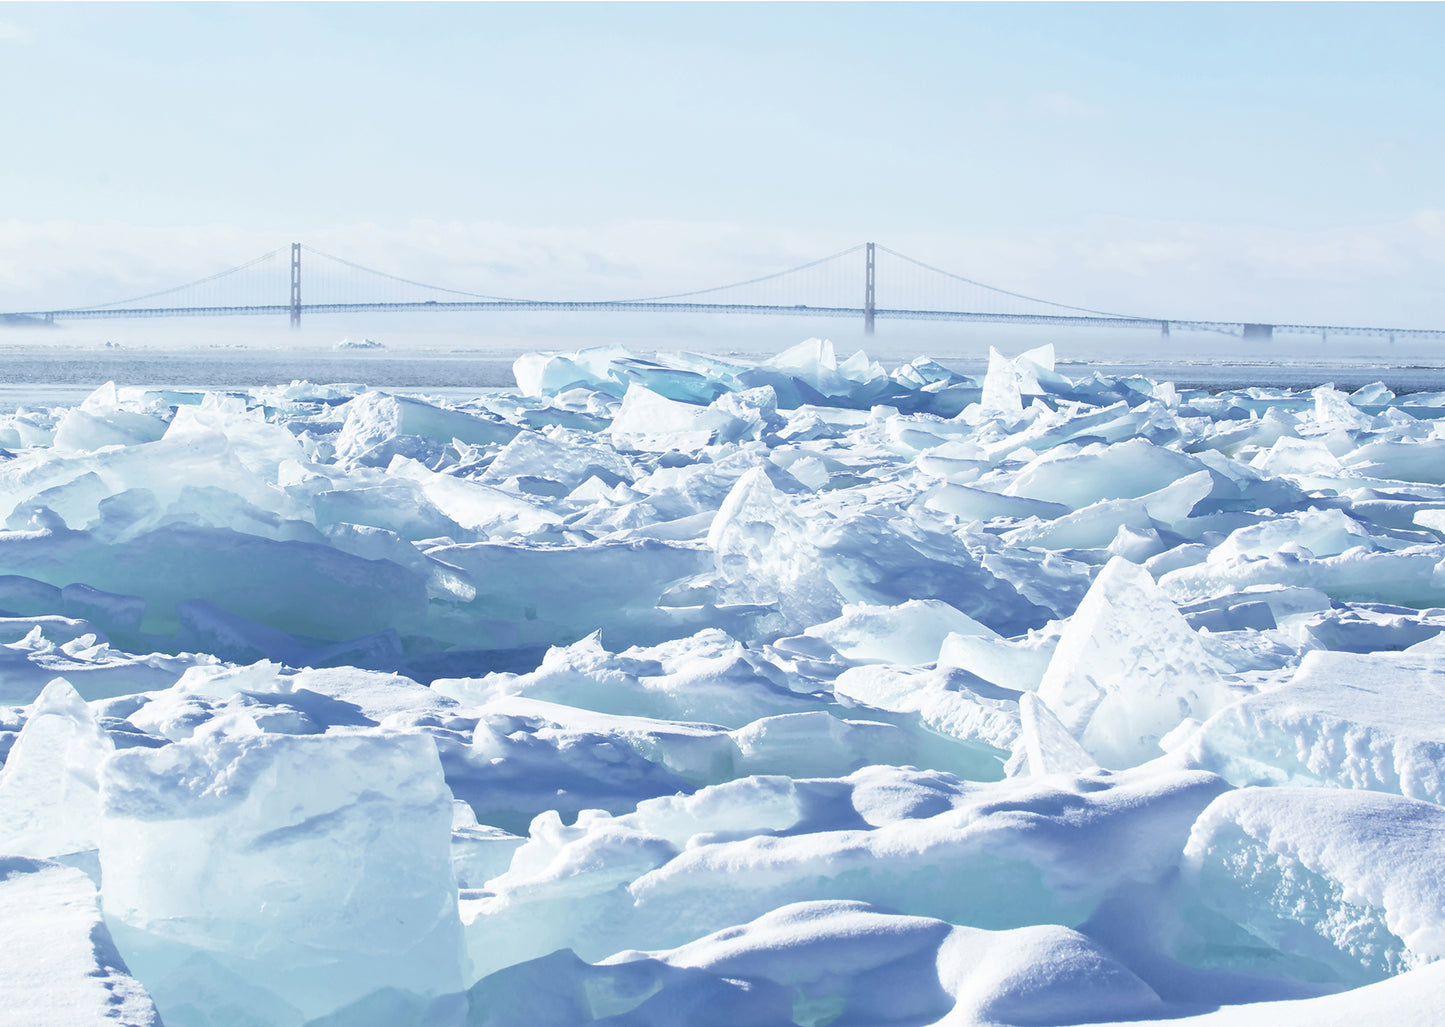 The Mackinac Bridge stands strong behind a veil of mist and wall of blue ice in this photo by Jennifer Wohletz of Mackinac Memories.